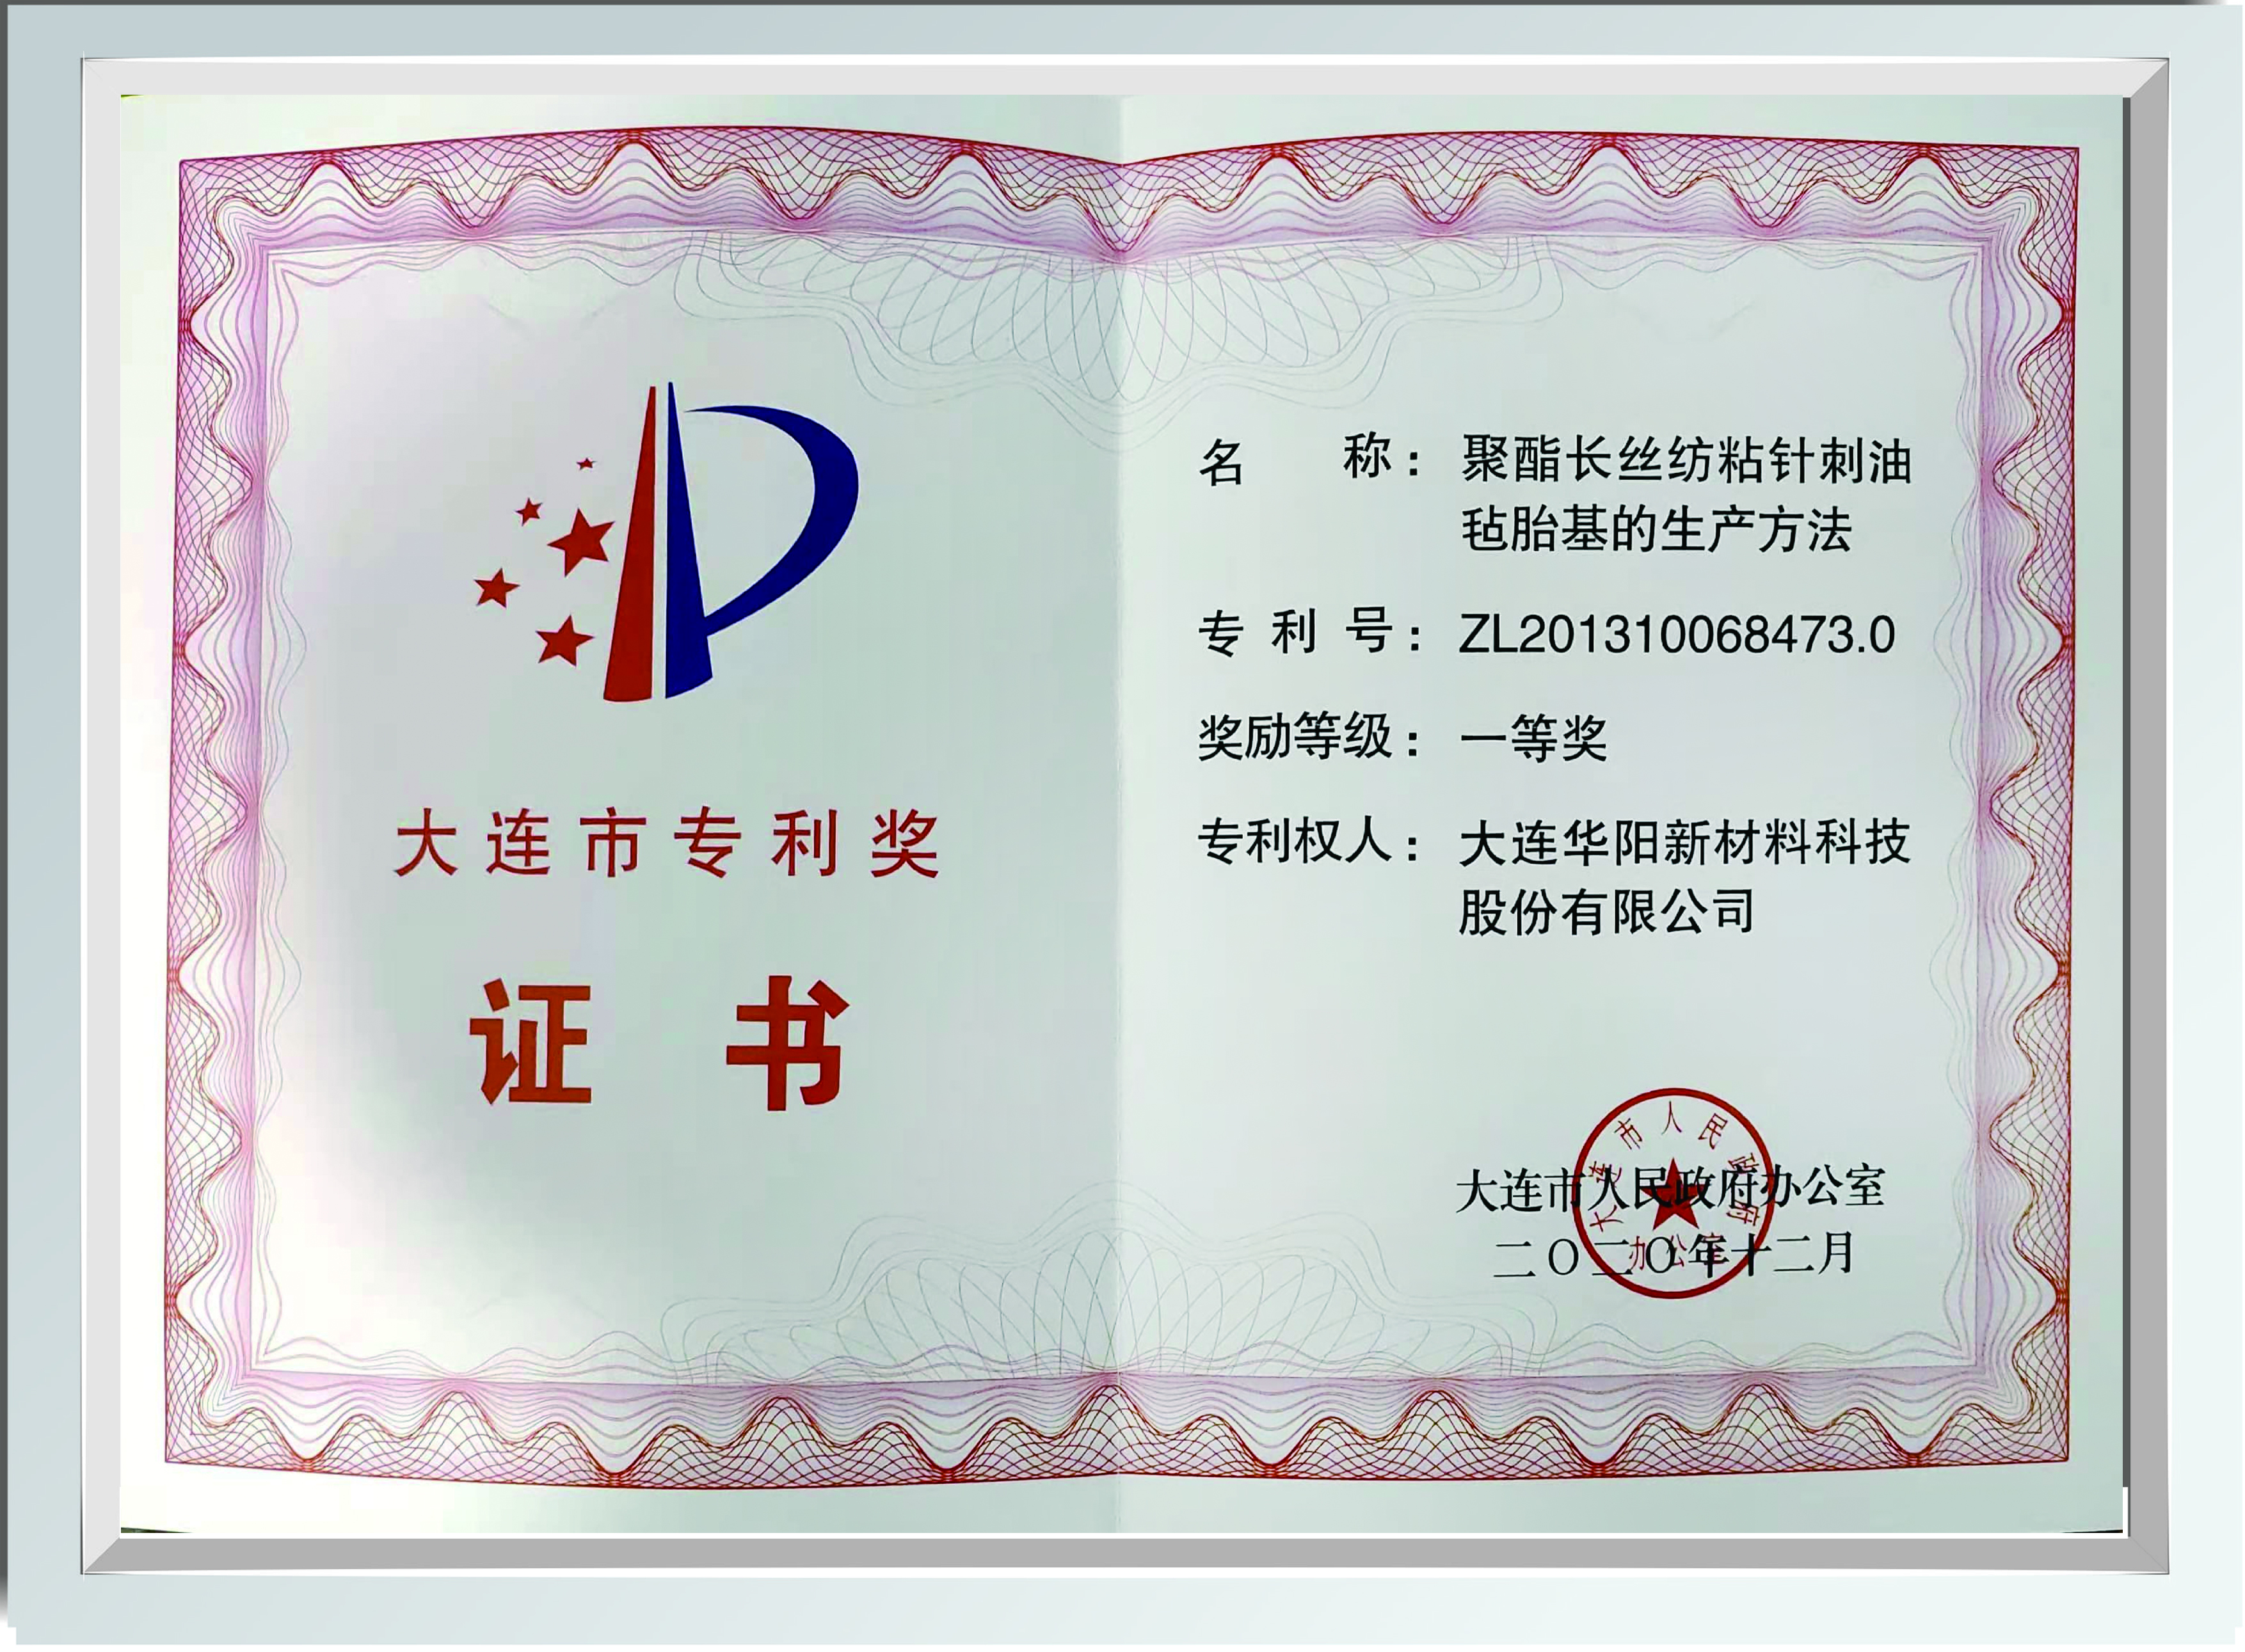 First prize of Dalian Patent